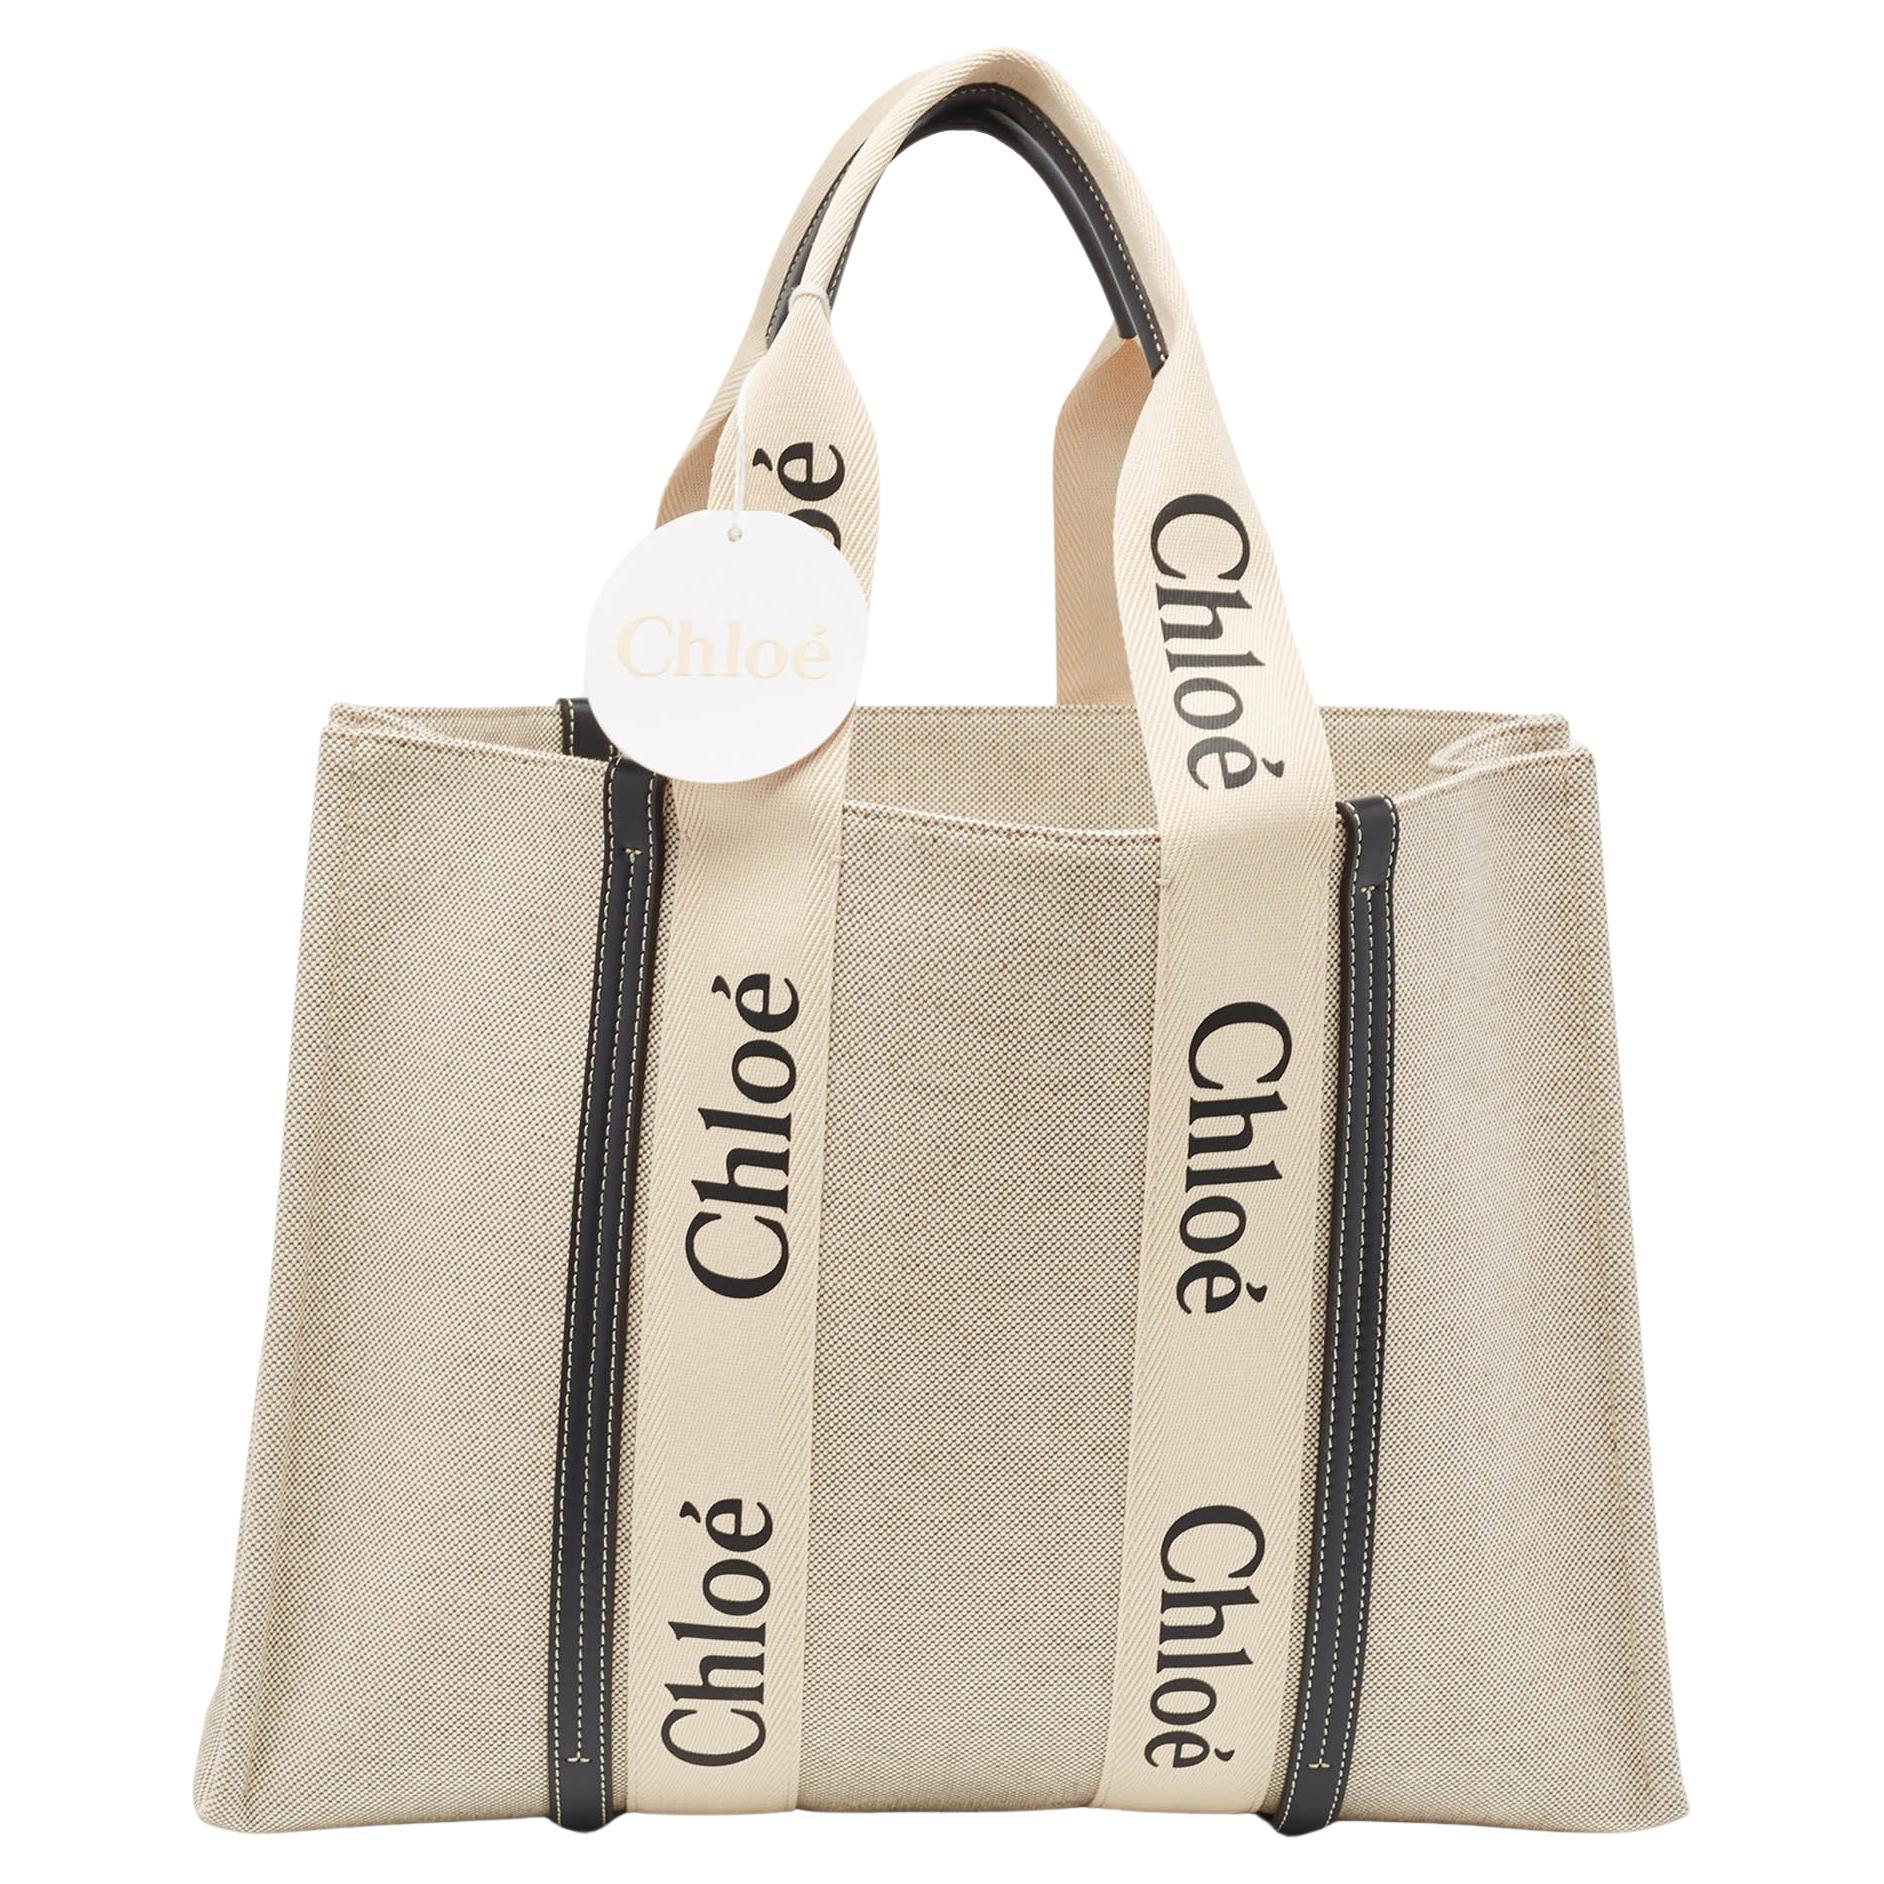 Chloe Beige/Black Canvas and Leather Large Woody Tote